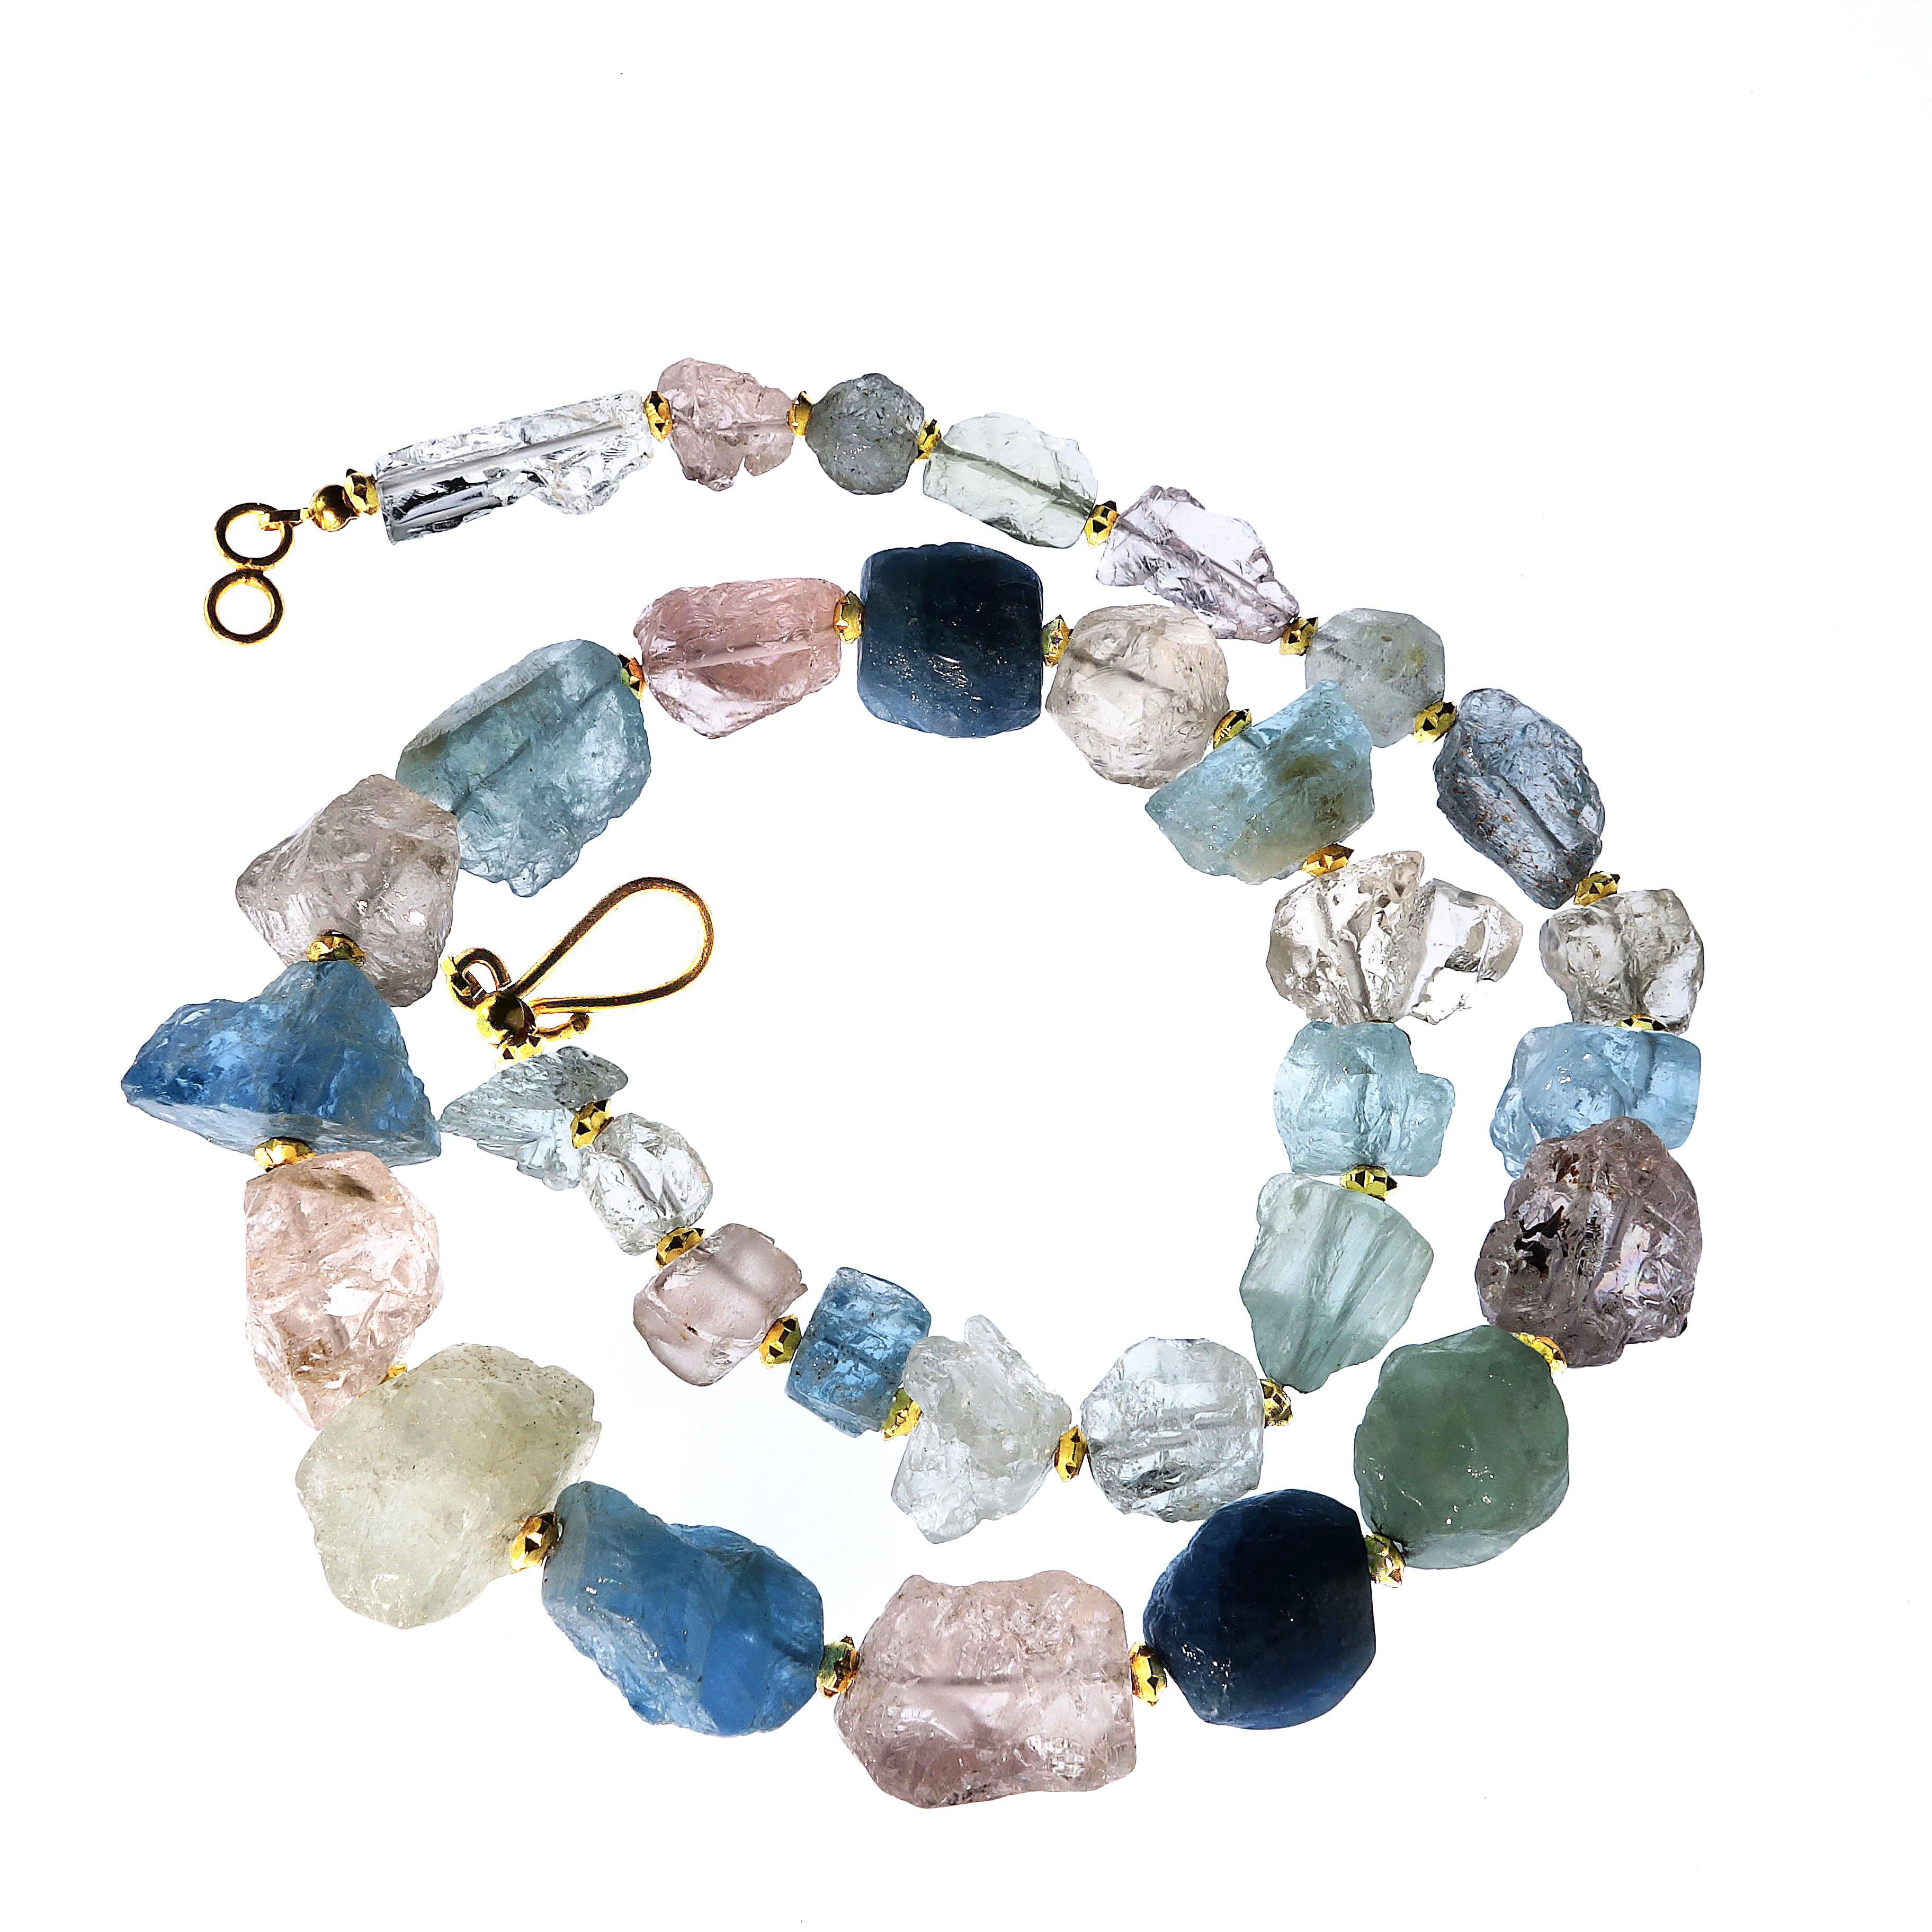 Unique necklace of unfaceted Beryls: Blue Aquamarine, Pink Morganite, Green Beryl, and Clear Goshenite. This material is a beautiful display of beryl colors. The 20.5 inch necklace is graduated from approximately 8x8mm to 23x14mm. The gemstones are